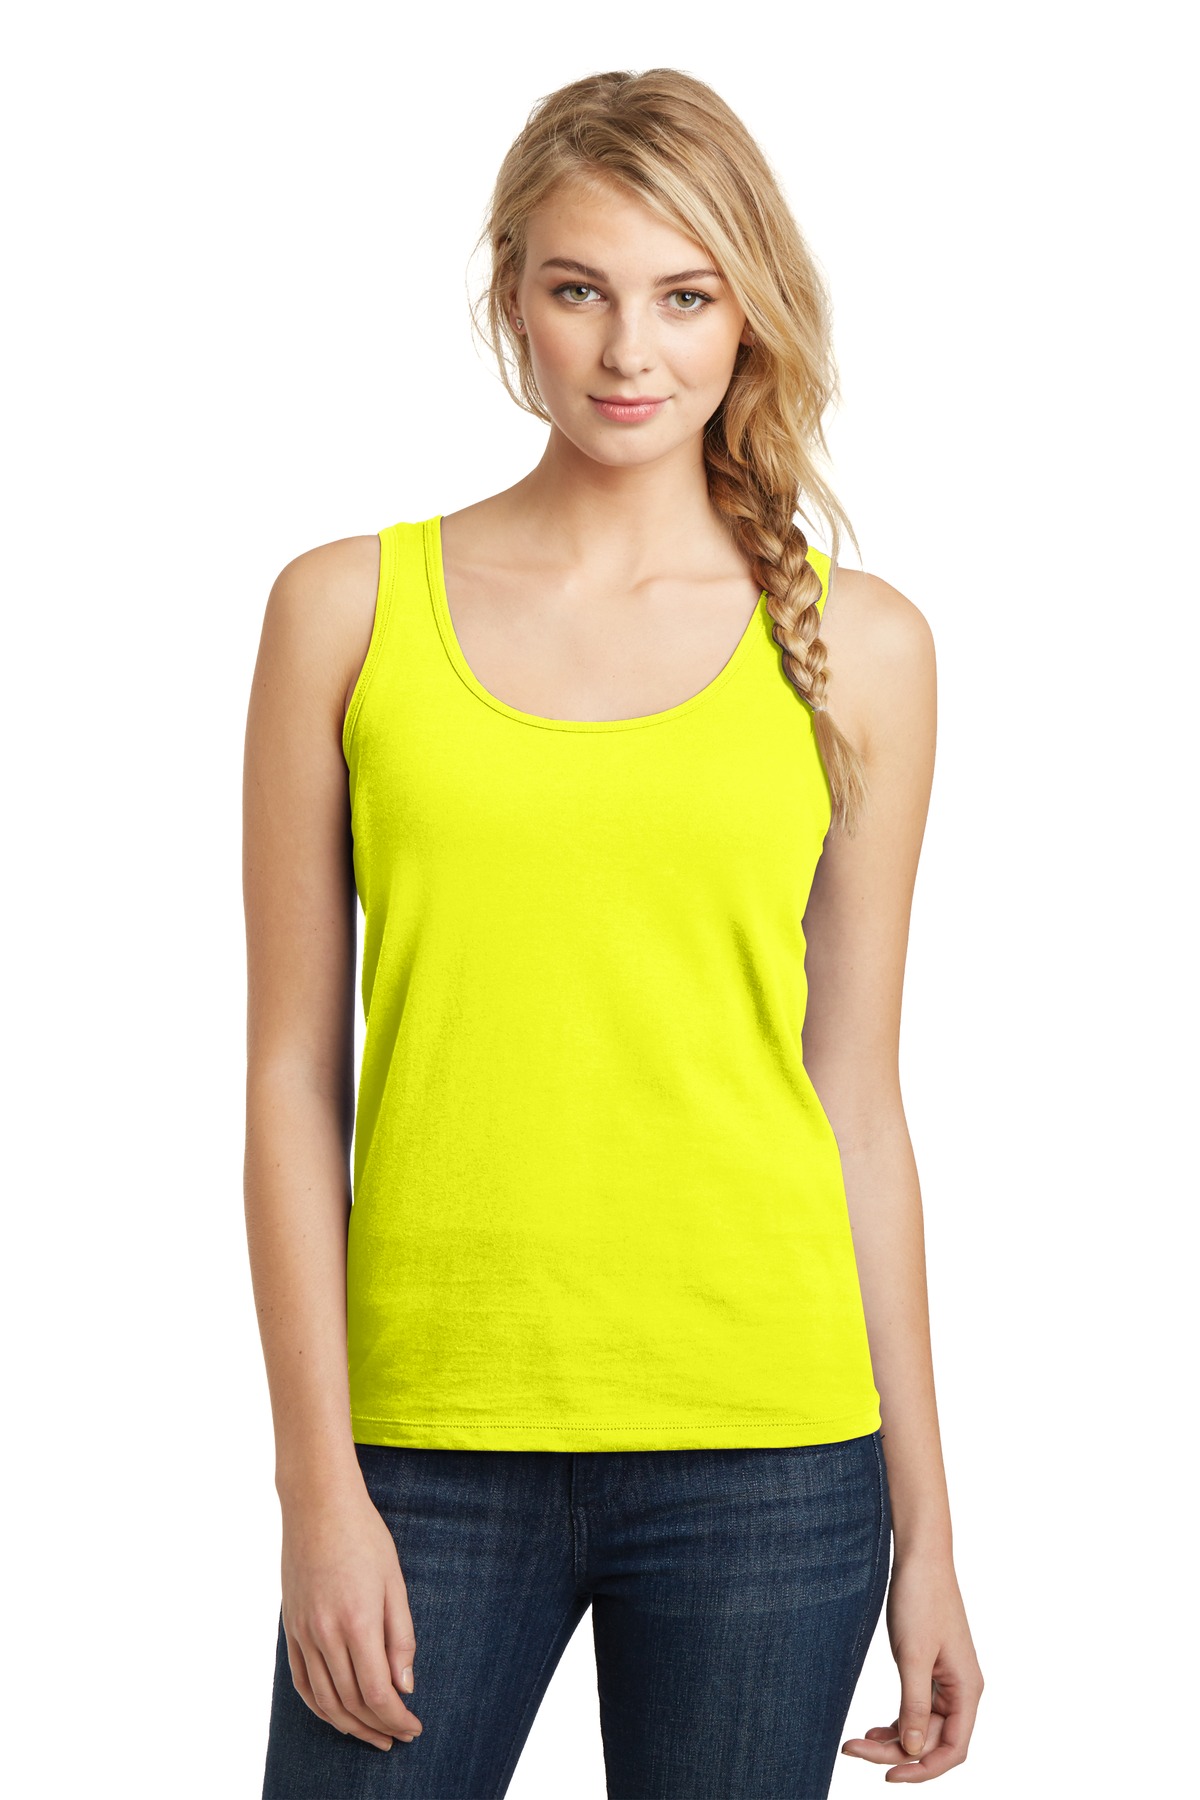 DT5301 District Womens Sleeveless Cotton The Concert Stylish Round Neck  Tank Top